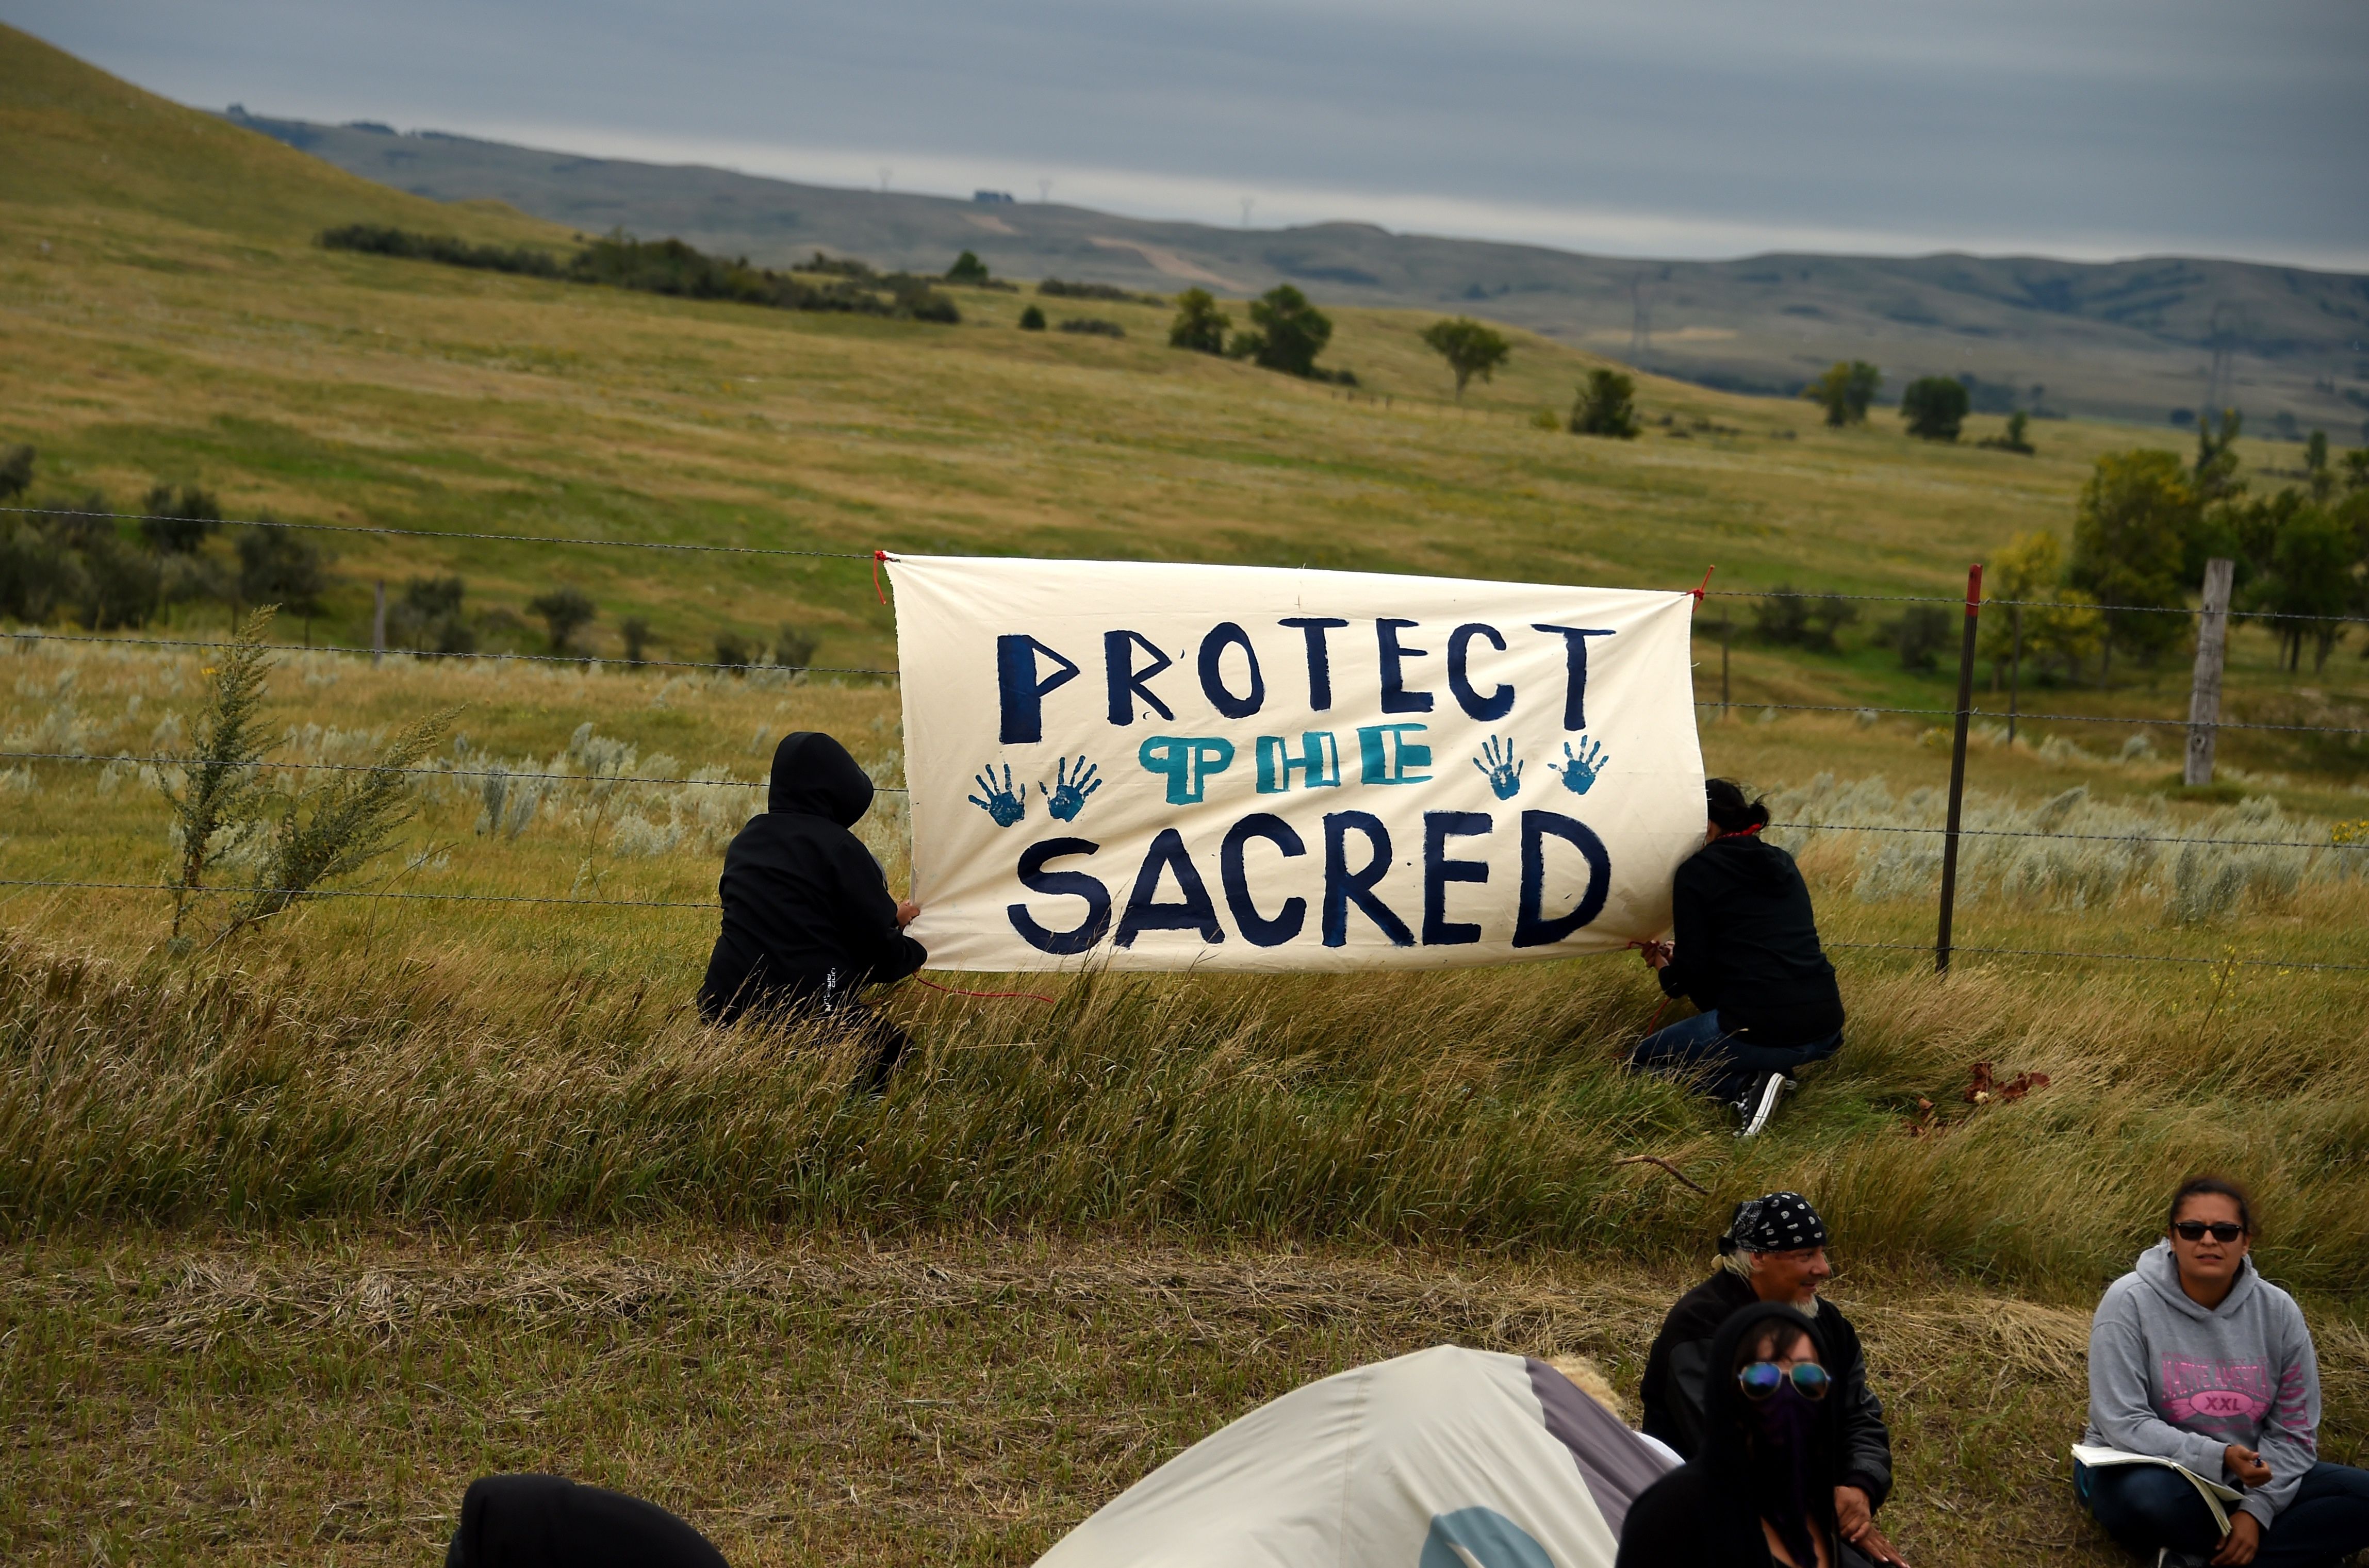 Demonstrators join the Standing Rock Sioux Tribe's protest of the oil pipeline that is slated to cross the Missouri River nearby, Sept. 4, 2016 near Cannon Ball, North Dakota. (Robyn Beck—AFP/Getty Images)